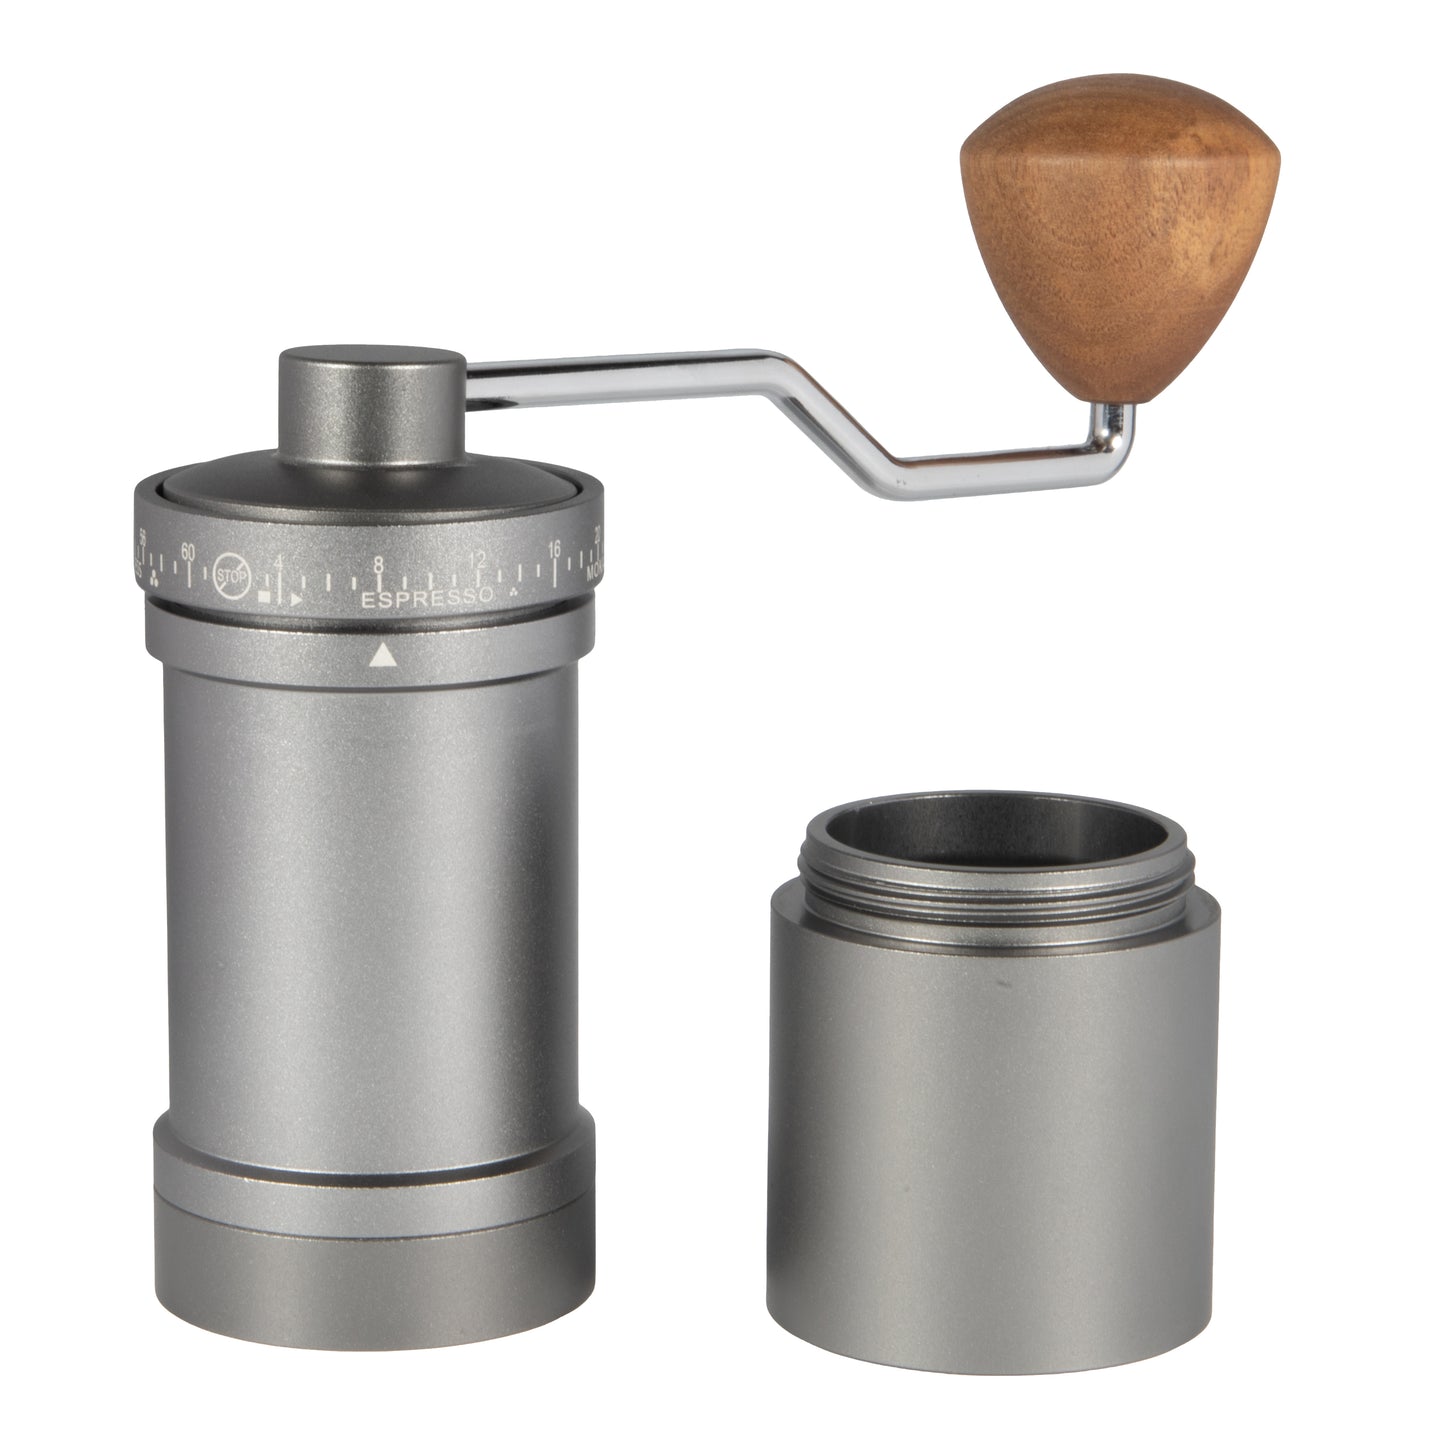 Hand Coffee Grinder Stainless Steel Portable Aluminium Alloy Manual Maker Camping